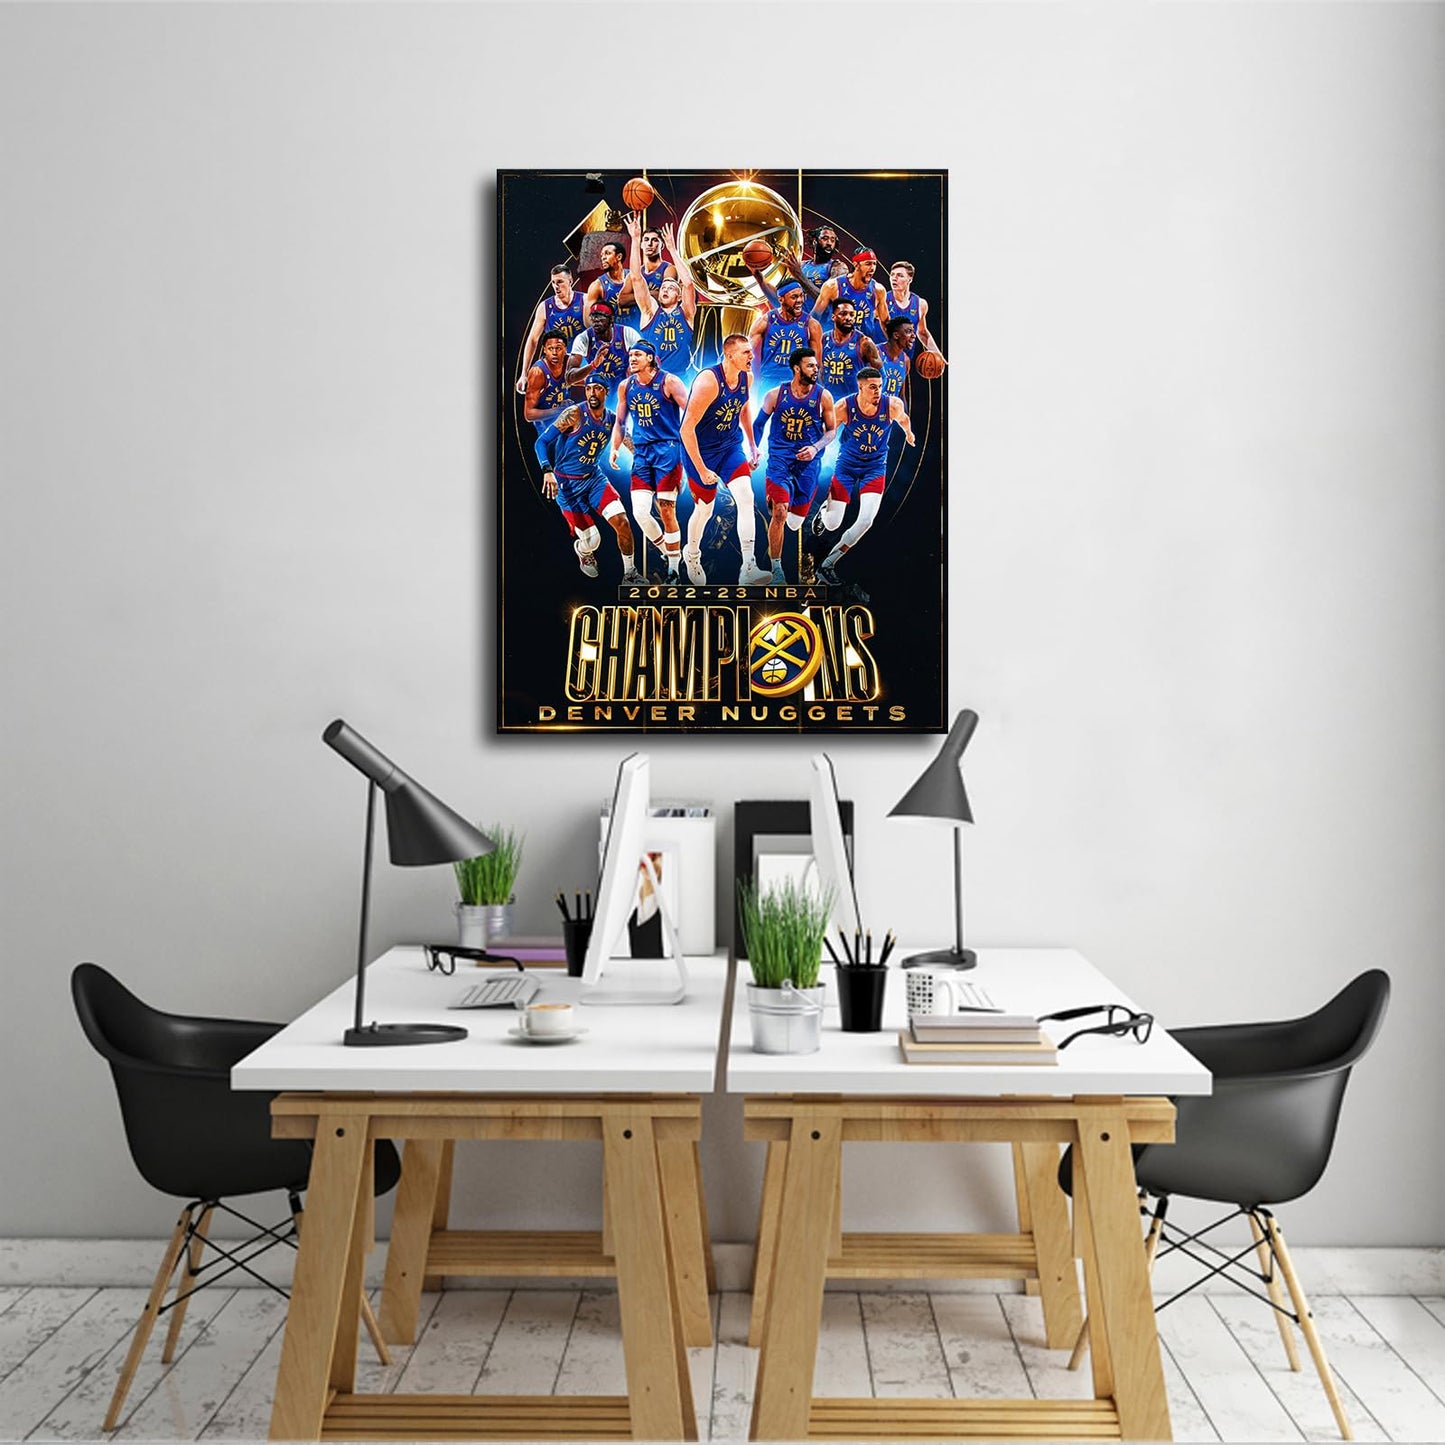 2022-2023 Nuggets Championship Poster Wall Art Print,Jokic & Murray Star Picture Artwork for Home Decor,Group Photo of The Nuggets Canvas Wall Poster Print (Nuggets,no Frame 12x15nch)